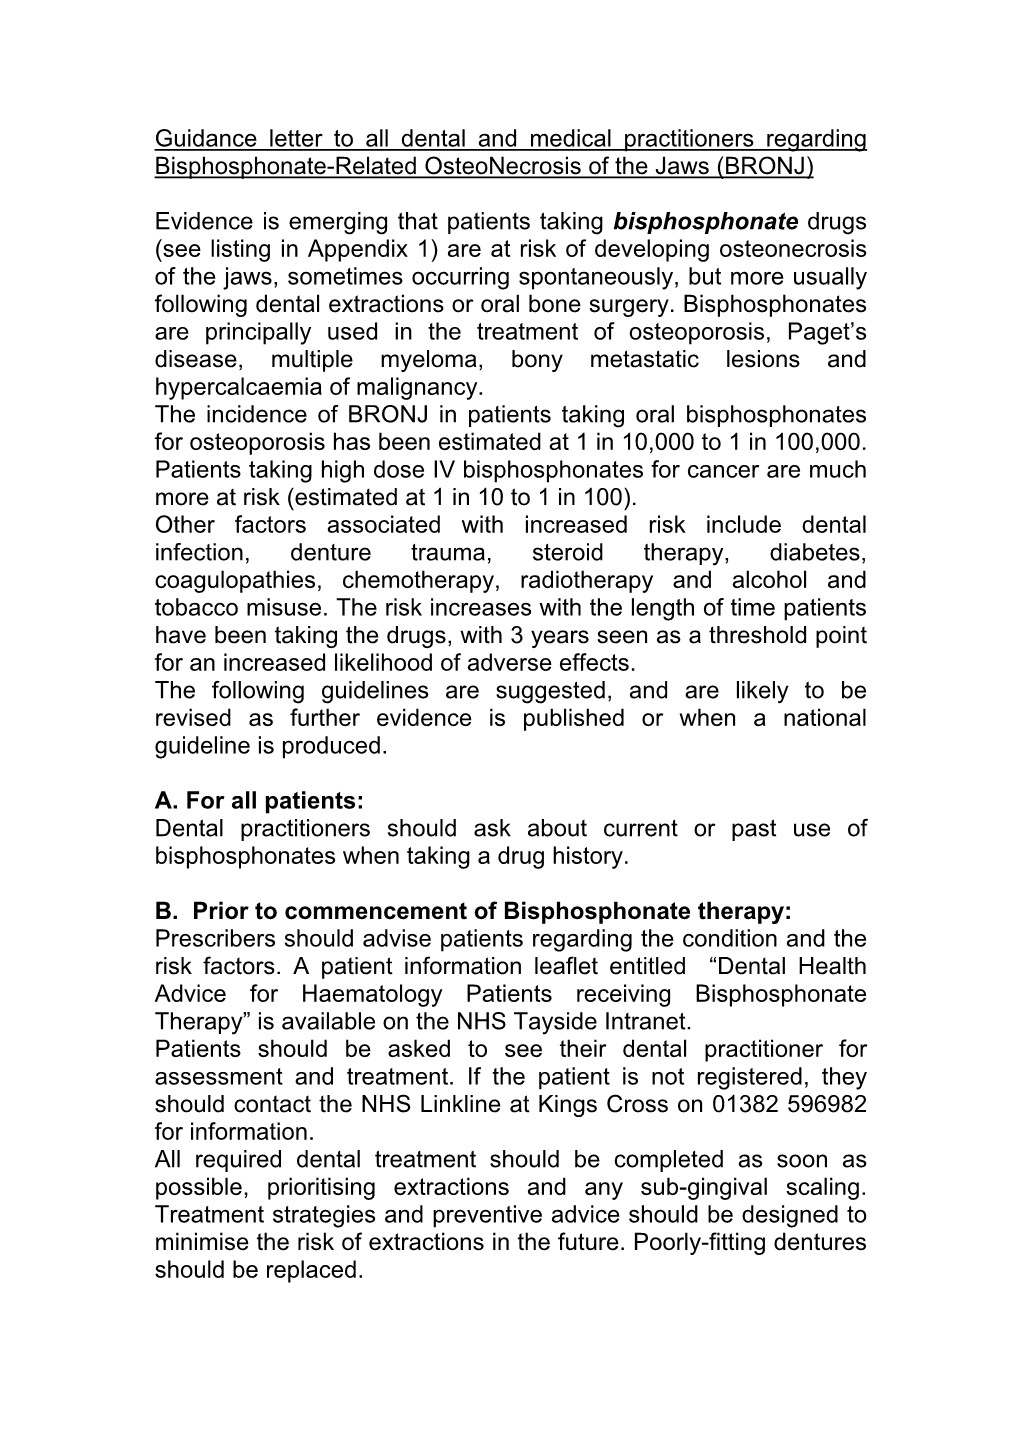 Guidance Letter to All Dental and Medical Practitioners Regarding Bisphosphonate-Related Osteonecrosis of the Jaws (BRONJ)